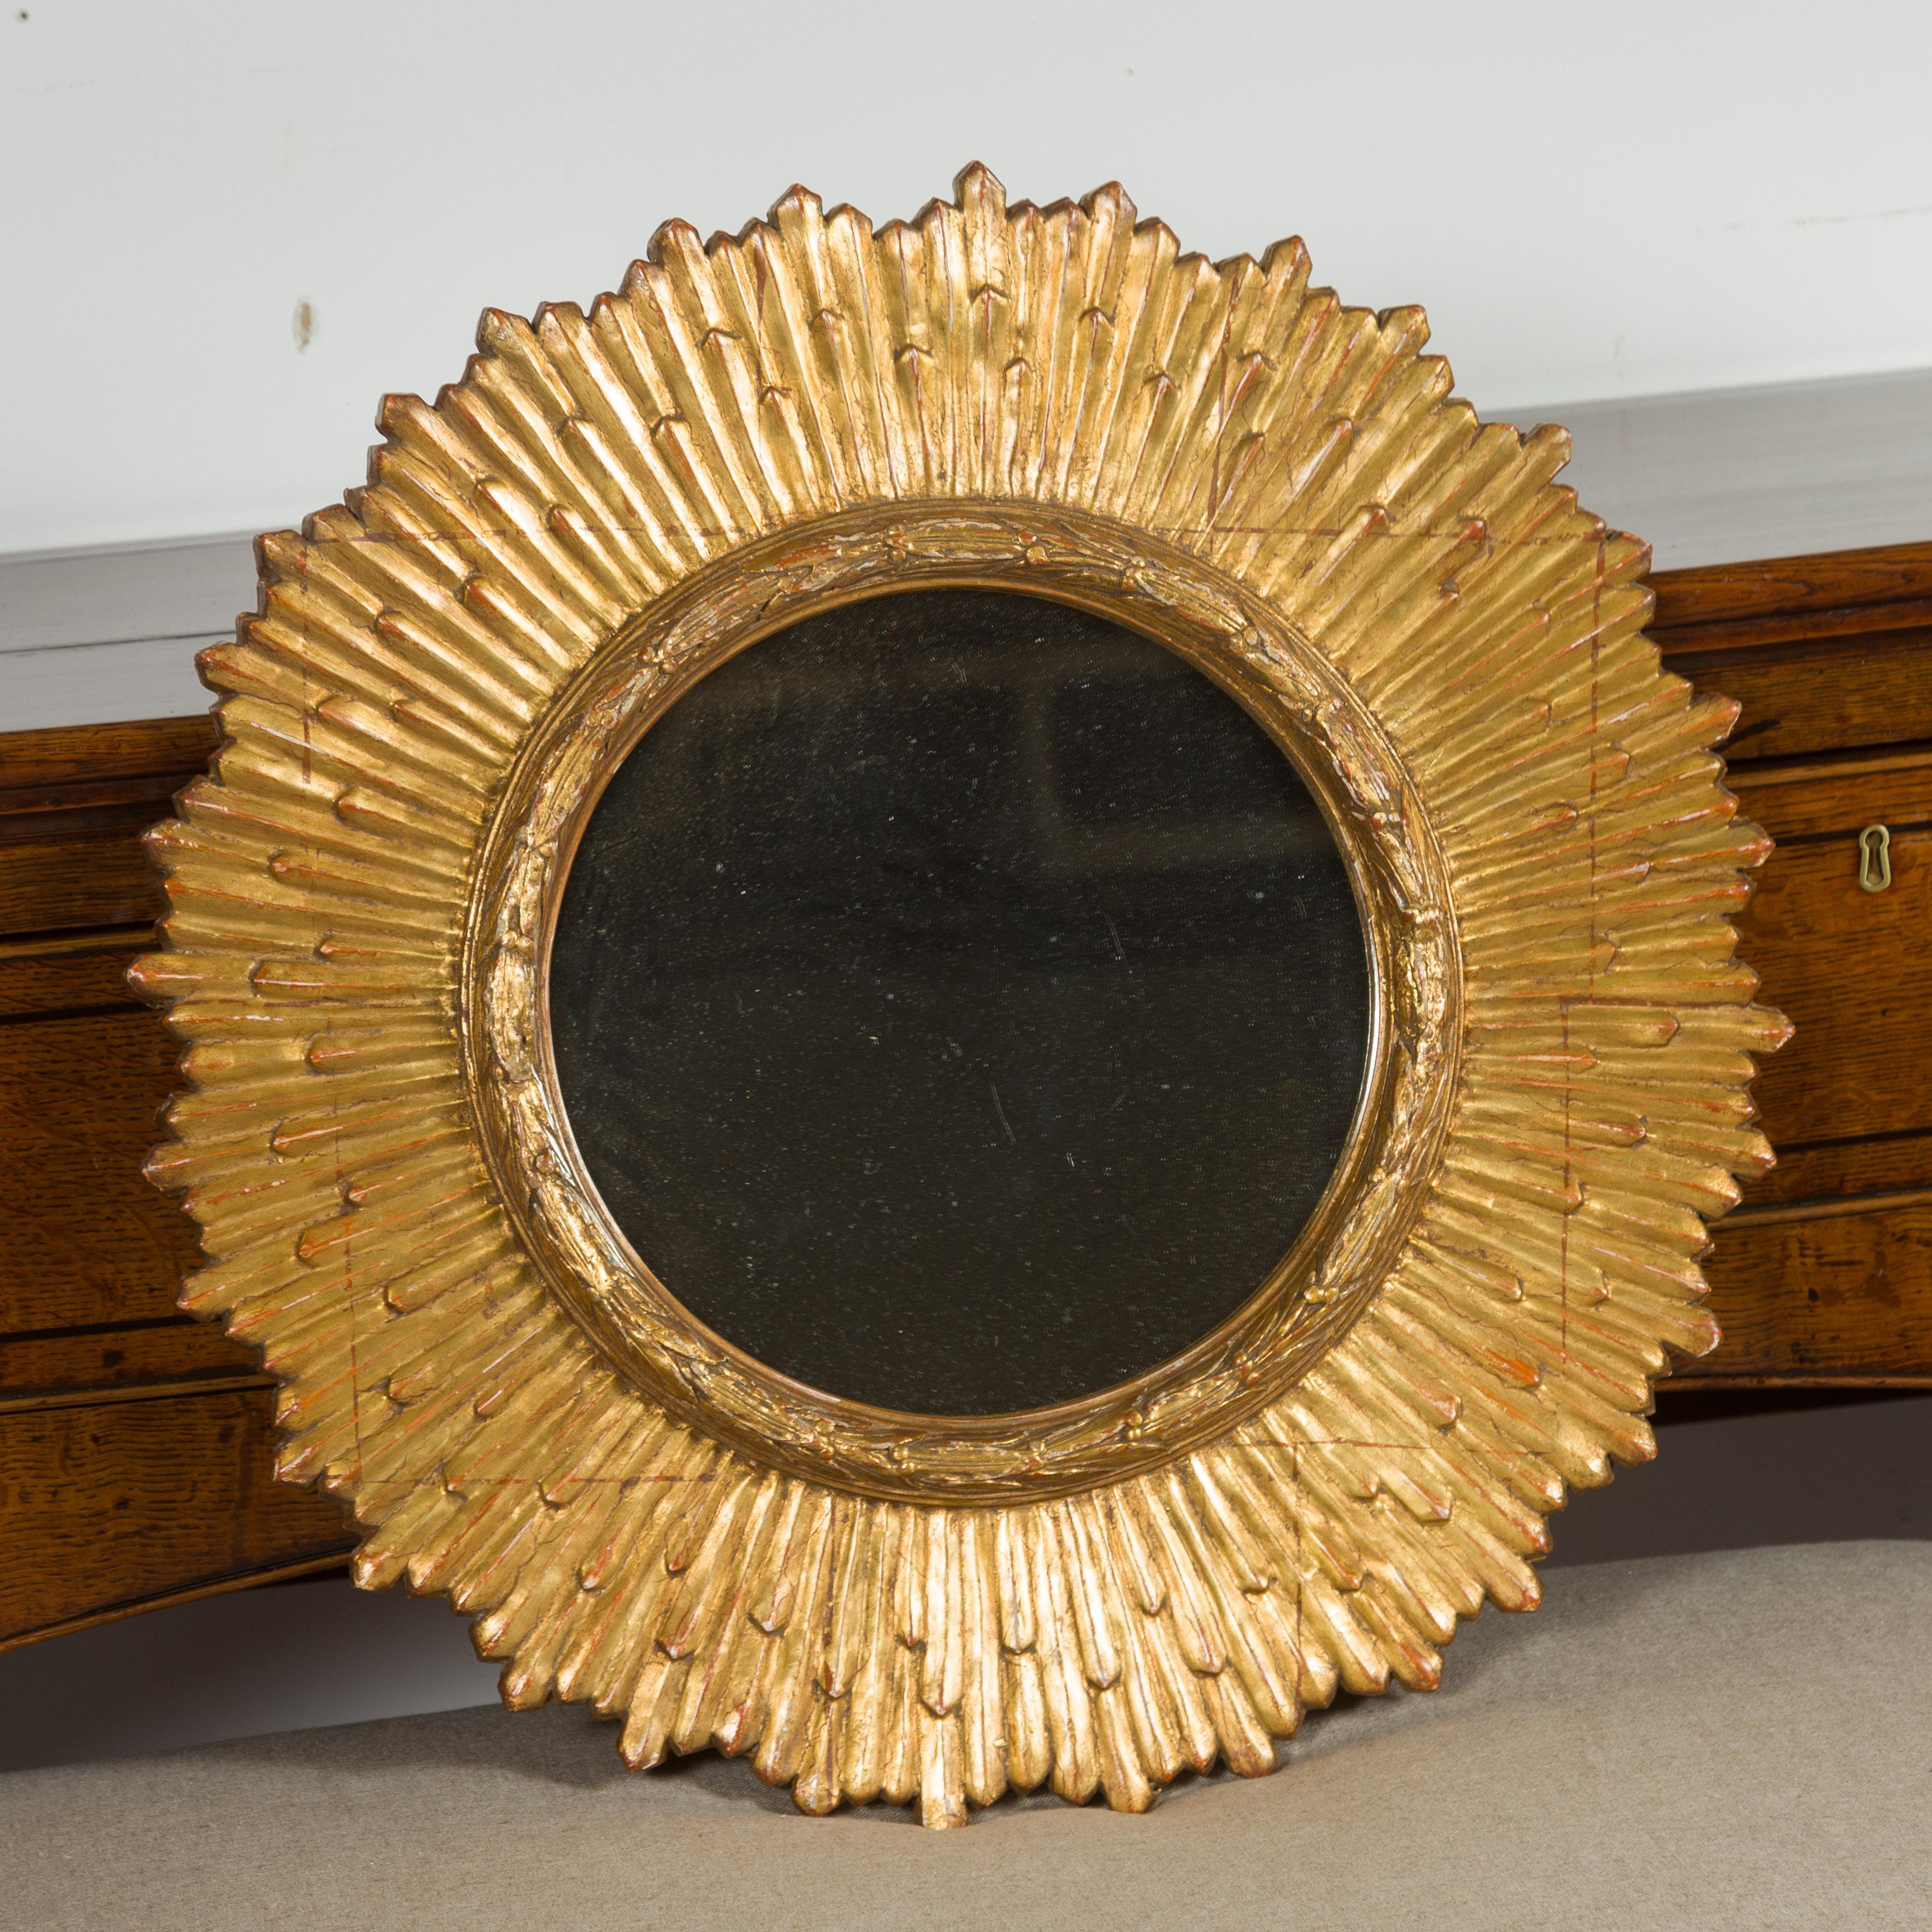 A French vintage giltwood sunburst mirror from the mid-20th century, with rays of slightly varying sizes, carved frame and red undertone. Born in France during the mid-century period, this sunburst mirror features a clear mirror plate surrounded by